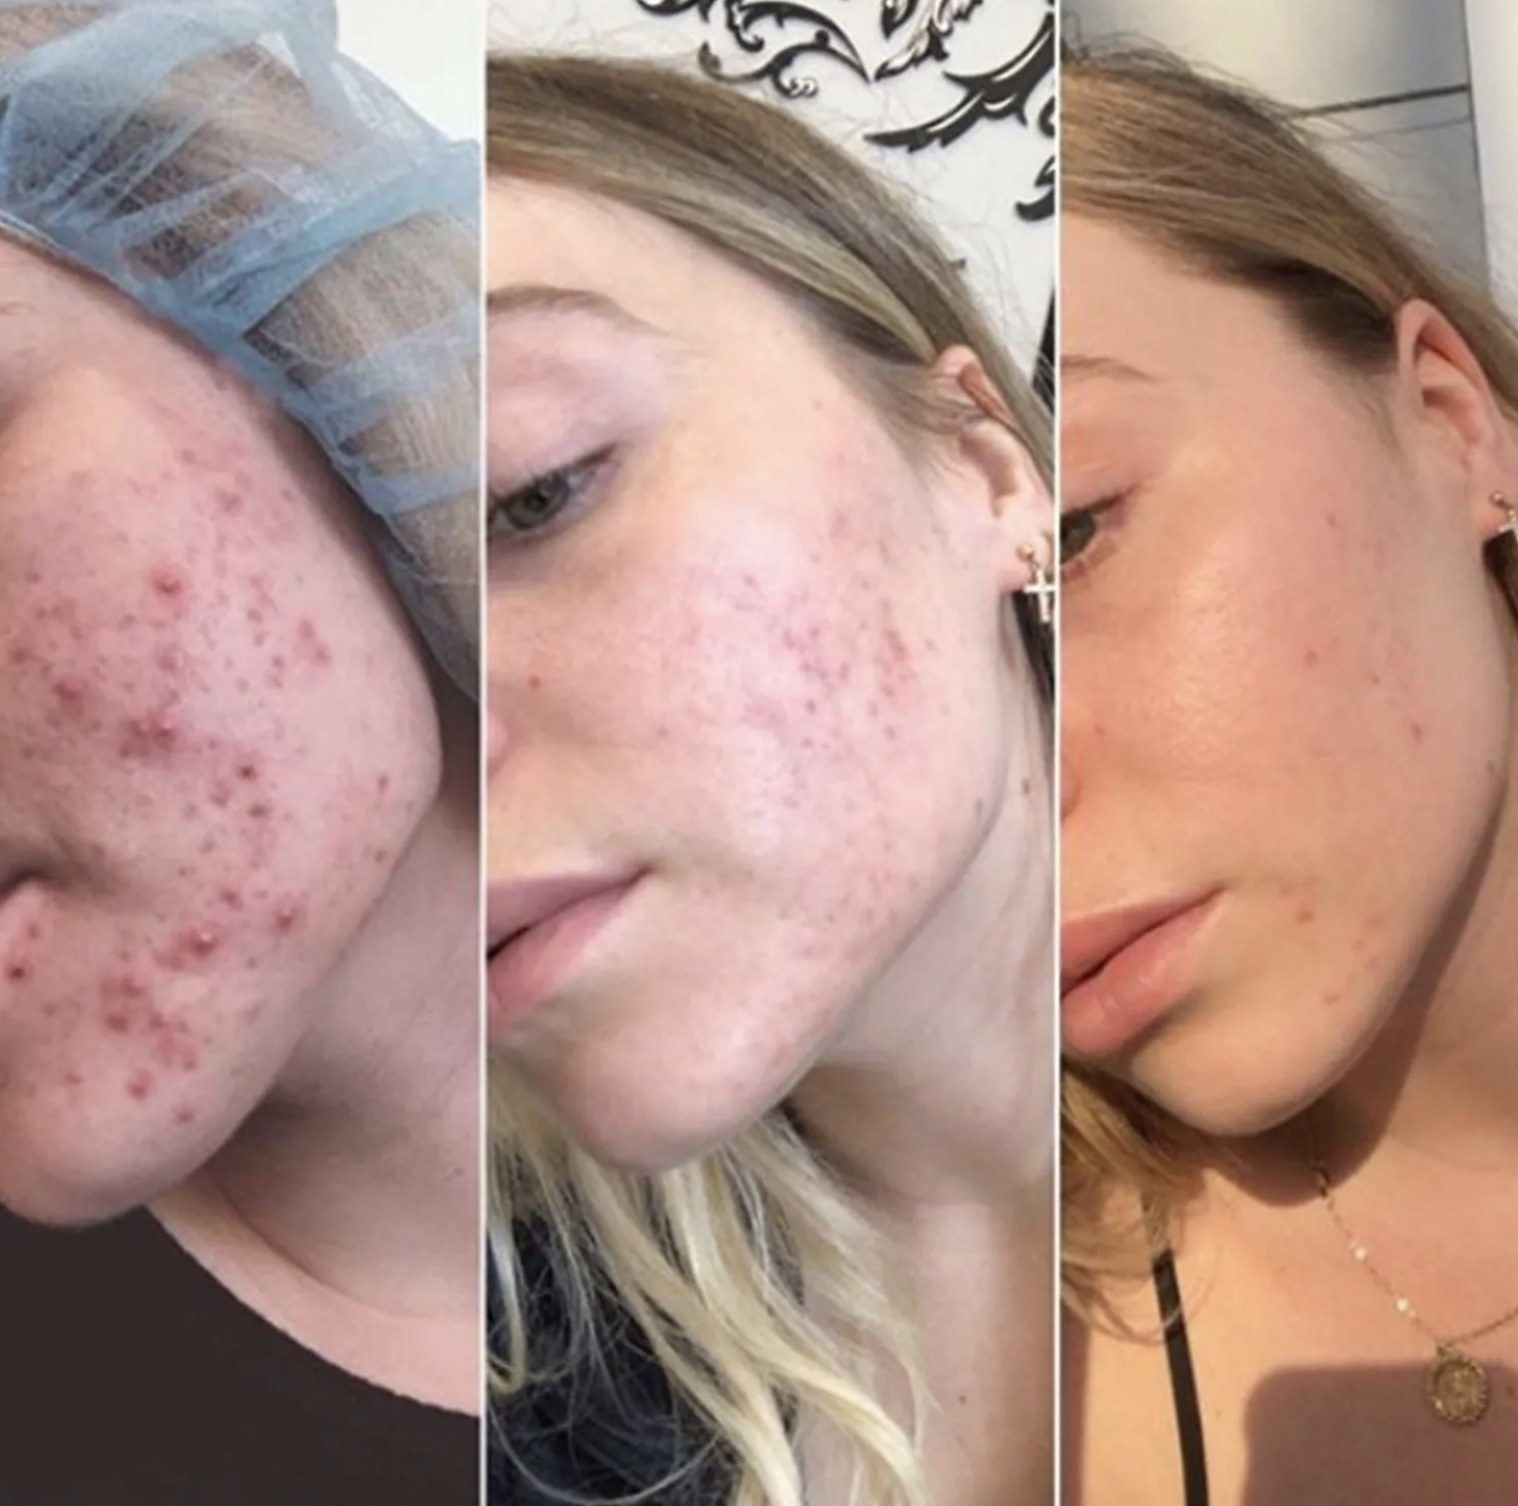 a before and after of a person using the exfoliant